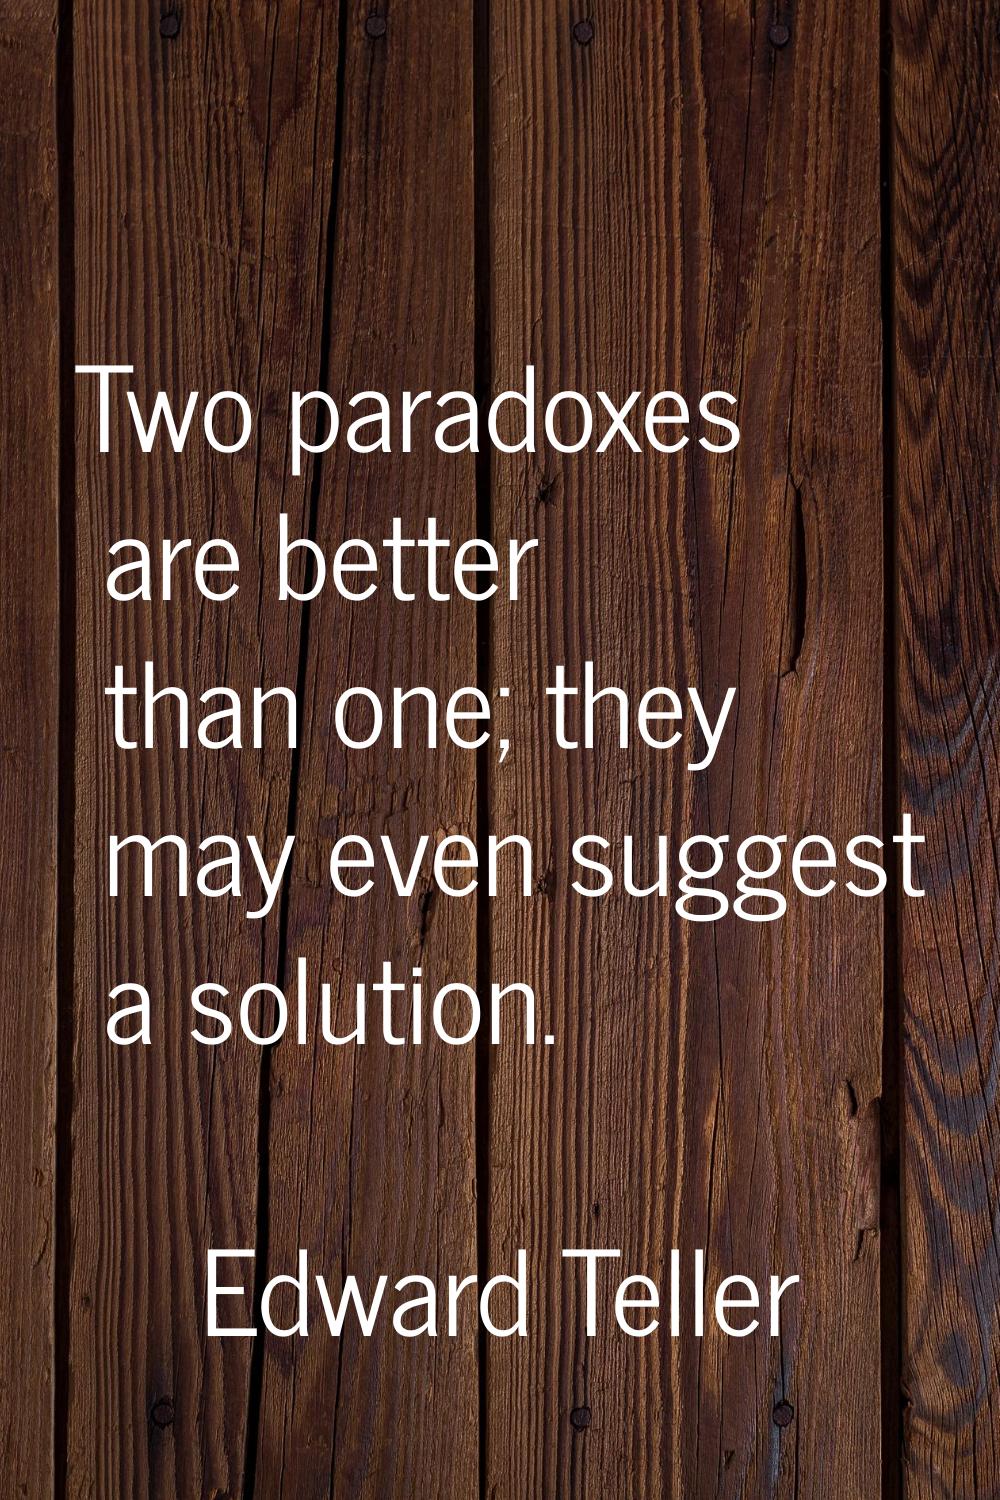 Two paradoxes are better than one; they may even suggest a solution.